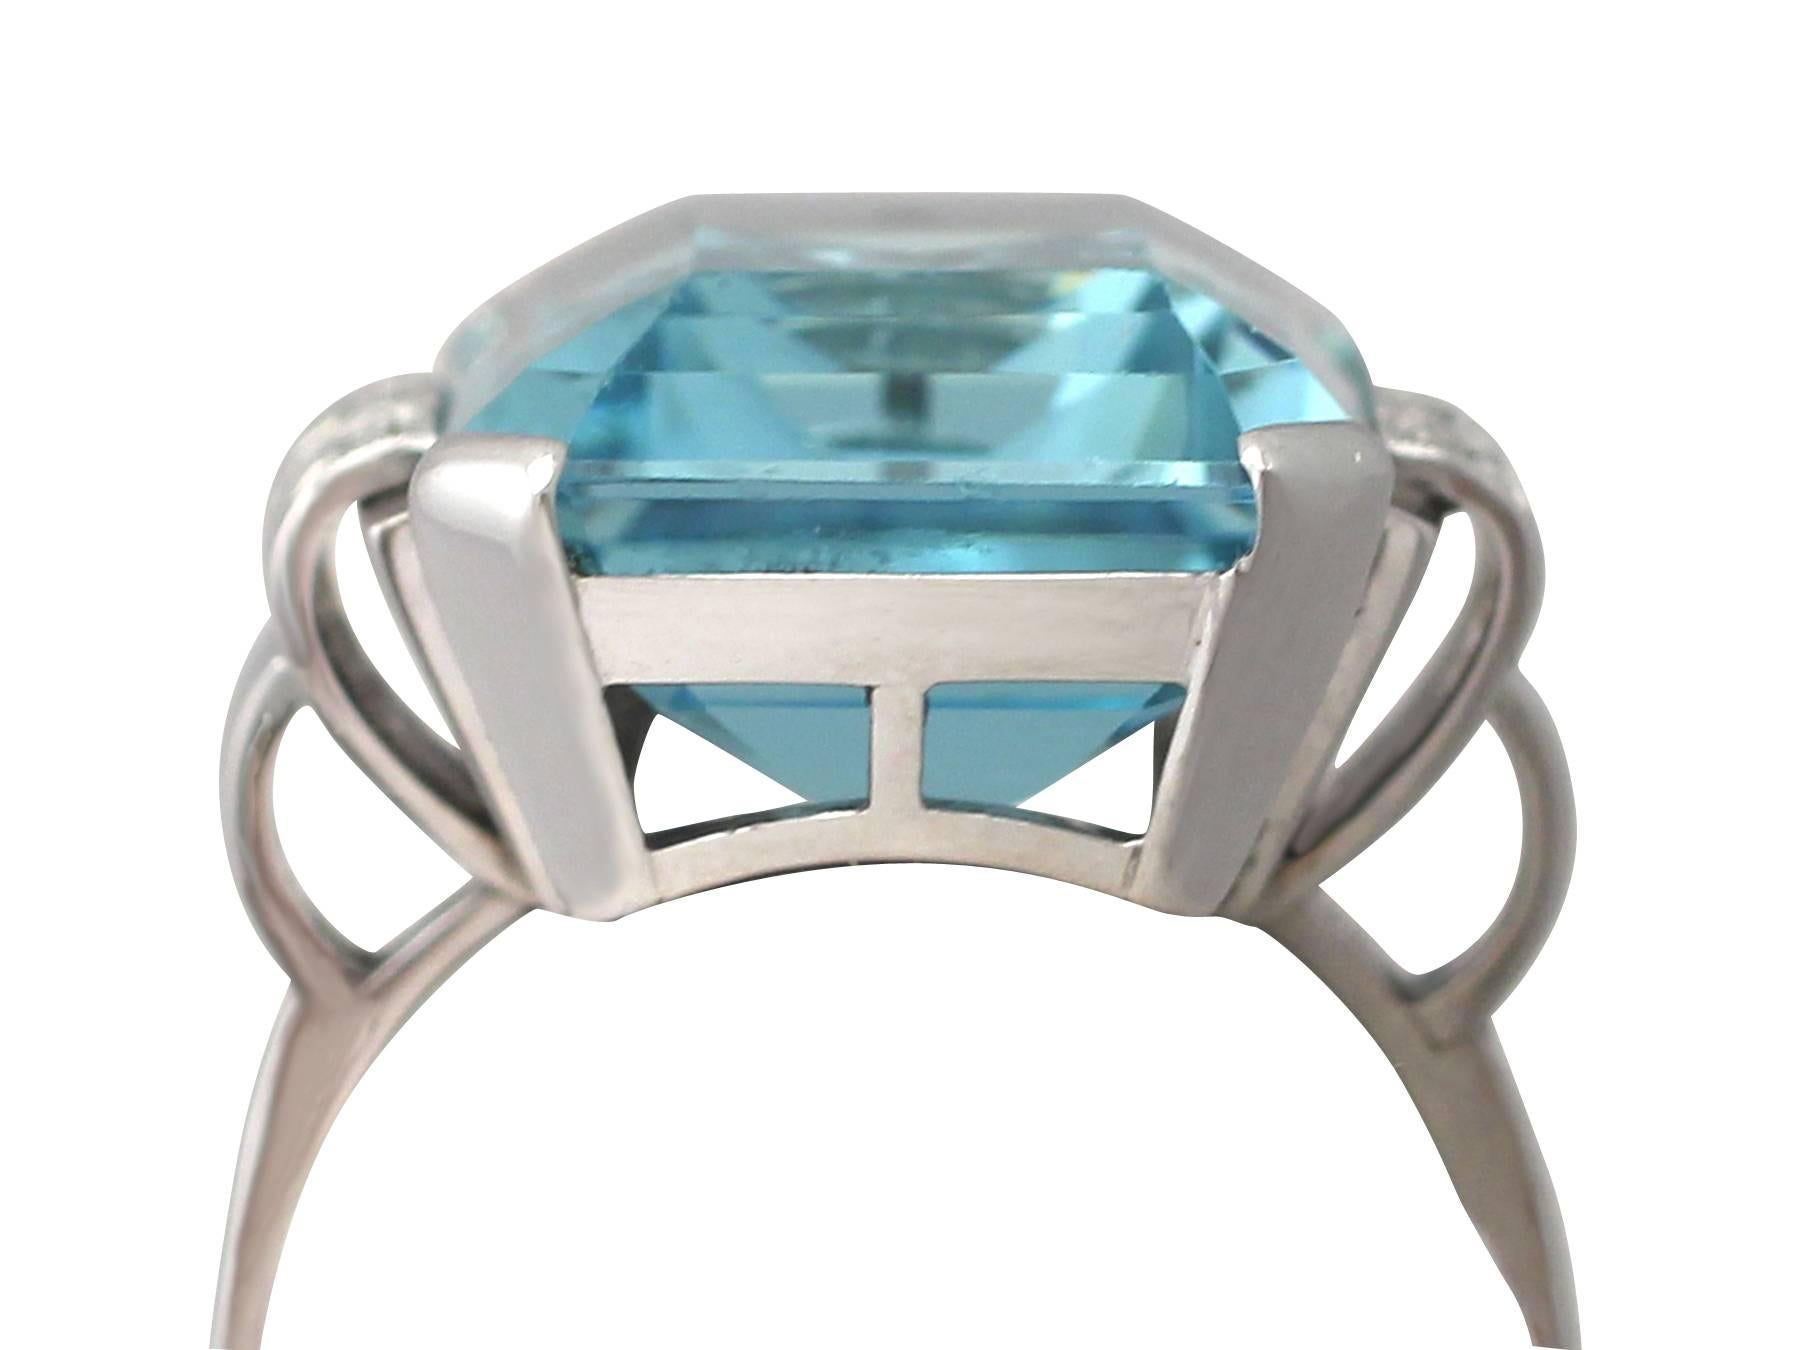 A stunning, fine and impressive 15.23 carat aquamarine and 0.04 carat diamond, 14 karat white gold dress ring in the Art Deco style; part of our jewelry and estate jewelry collections

This stunning, fine and impressive aquamarine ring has been